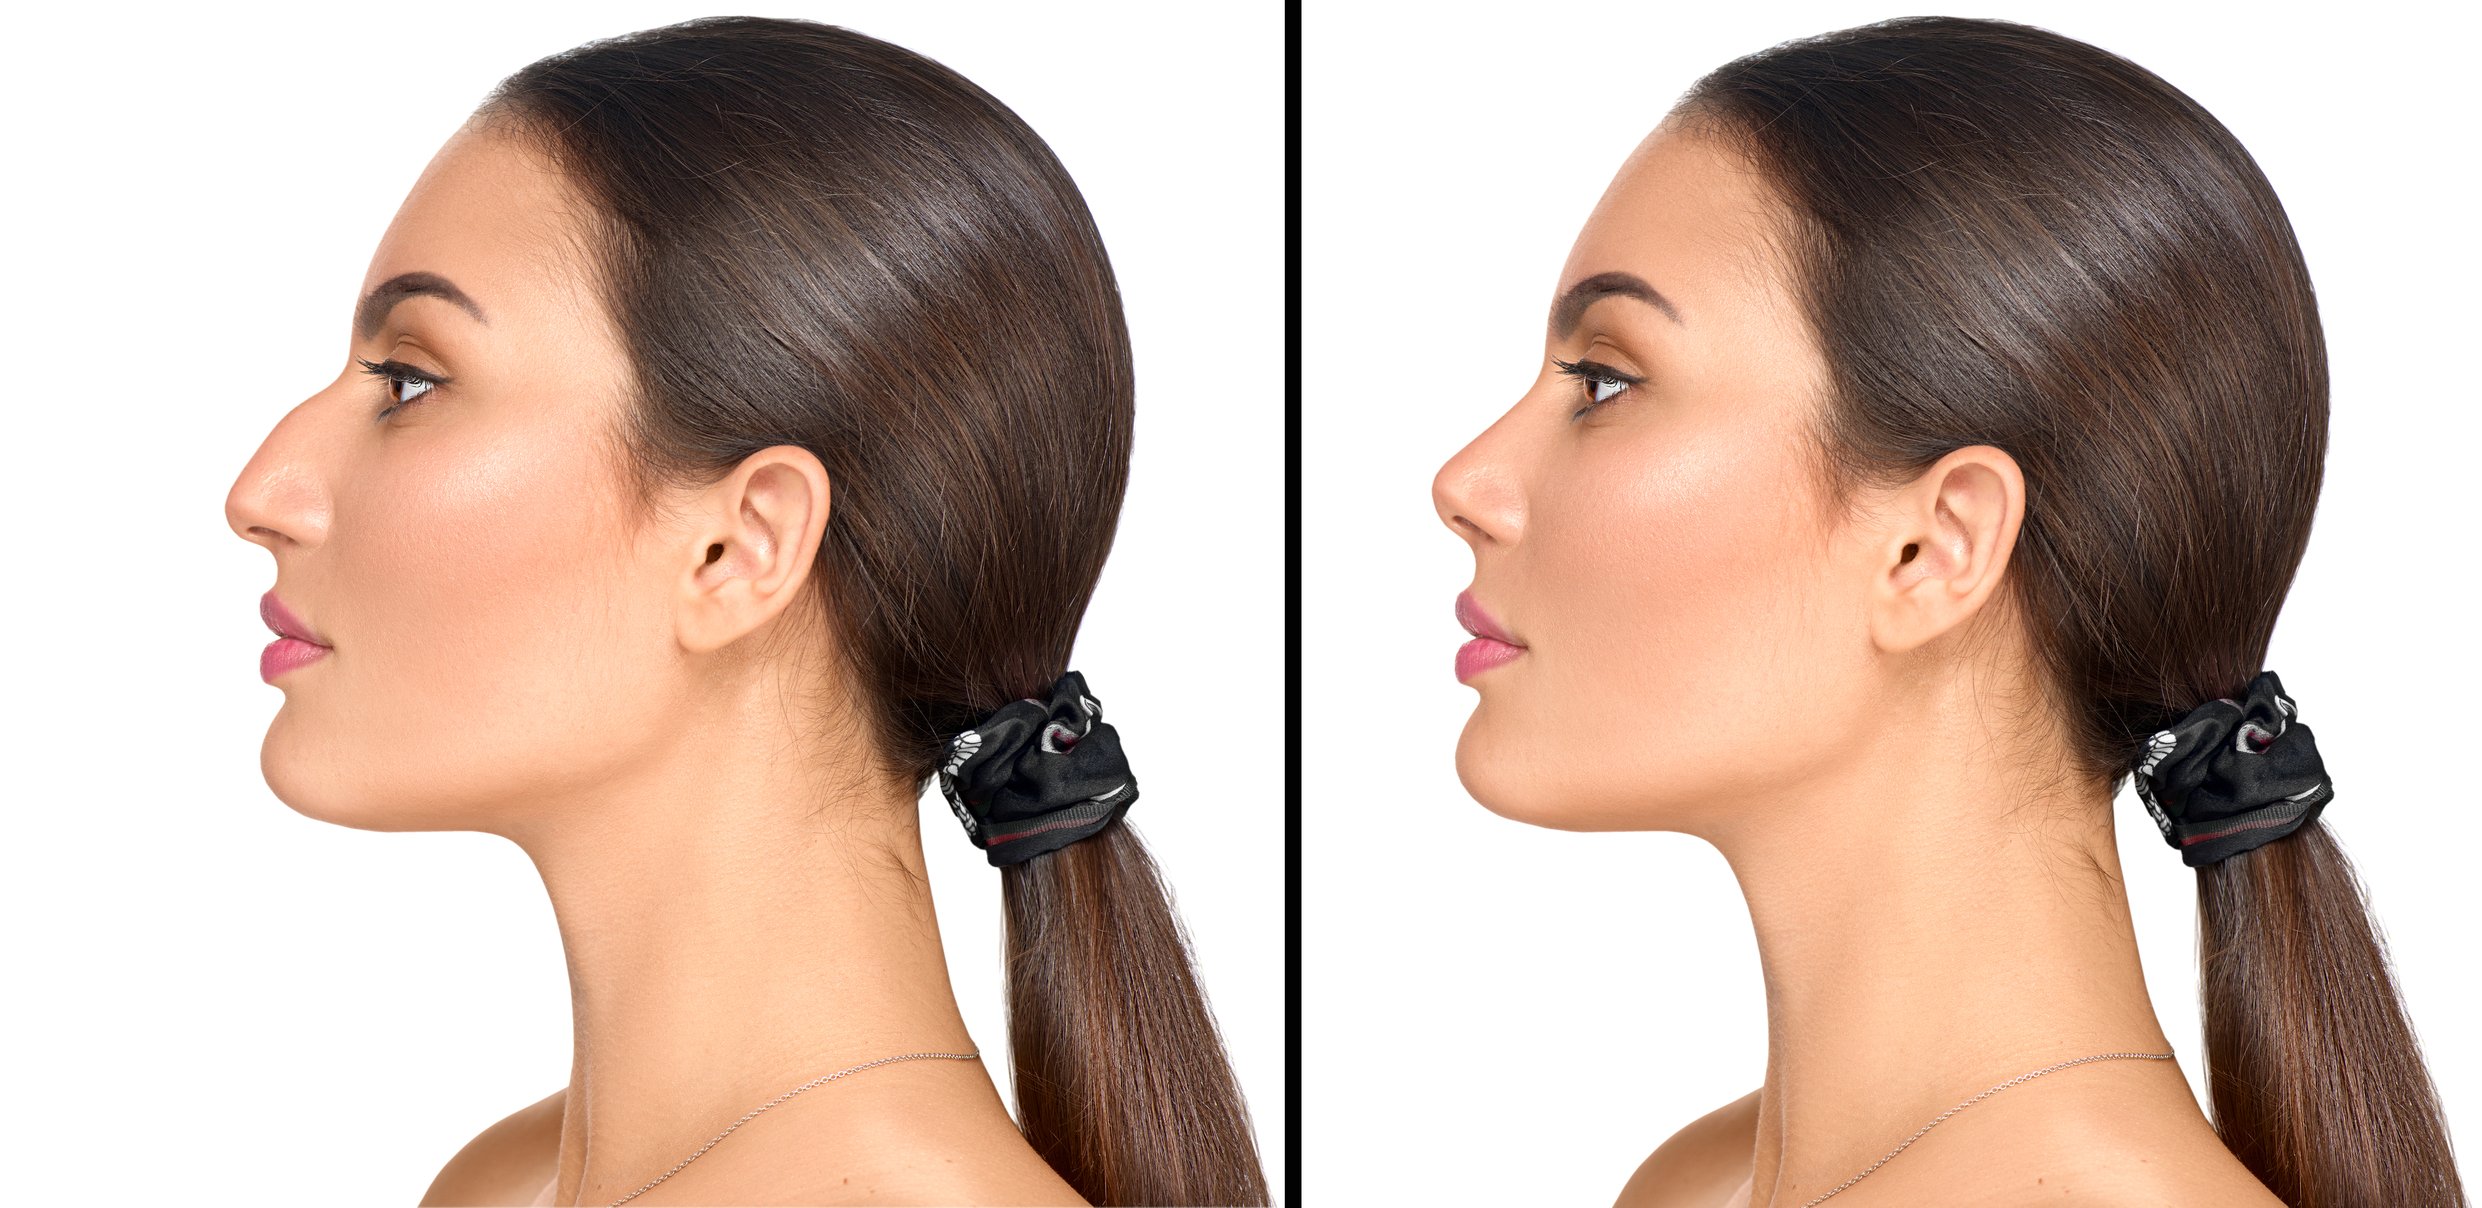 What You Need to Know Before Having Rhinoplasty in Turkey